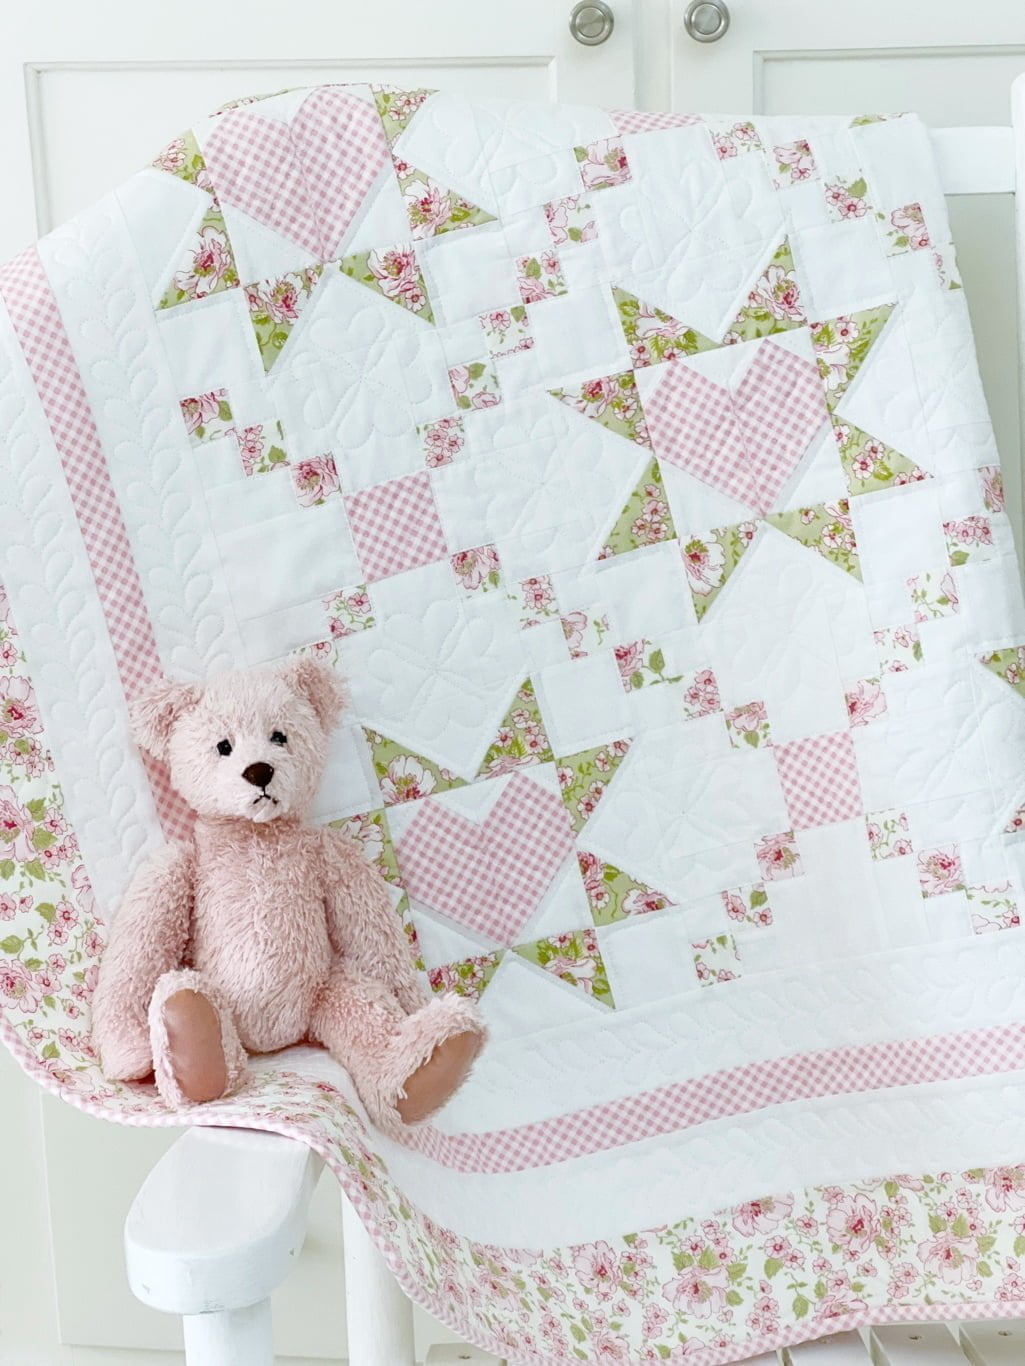 Loving Wishes quilt shown in Grace fabrics by Brenda Riddle.